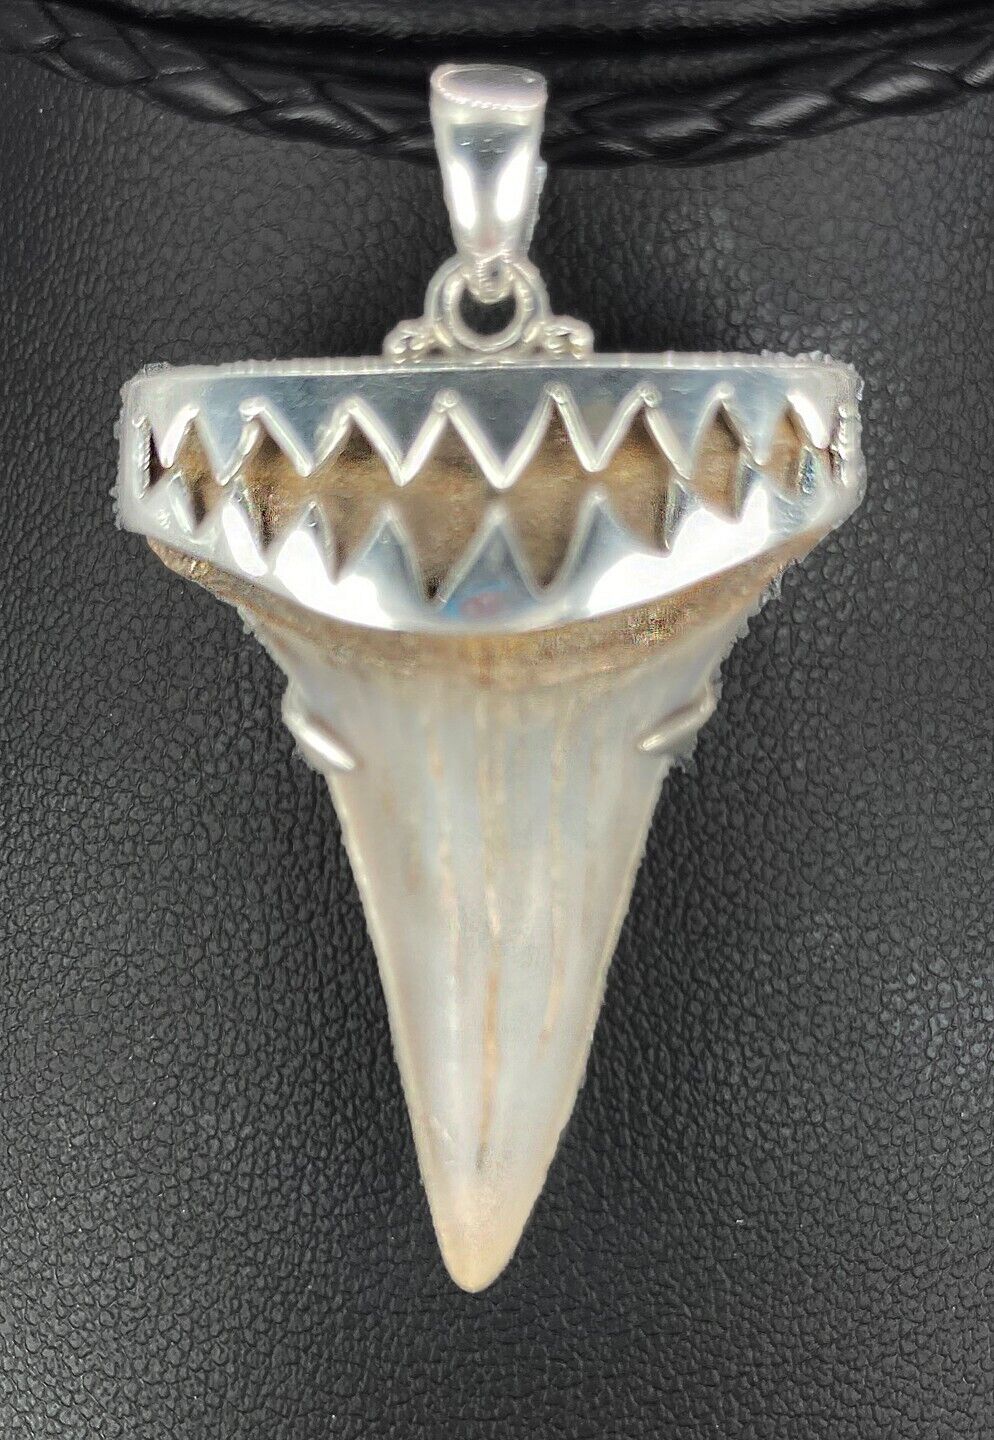 Fossil Shark Tooth Pendant – C. hastalis, Early White Shark Tooth, w/Silver Cap 